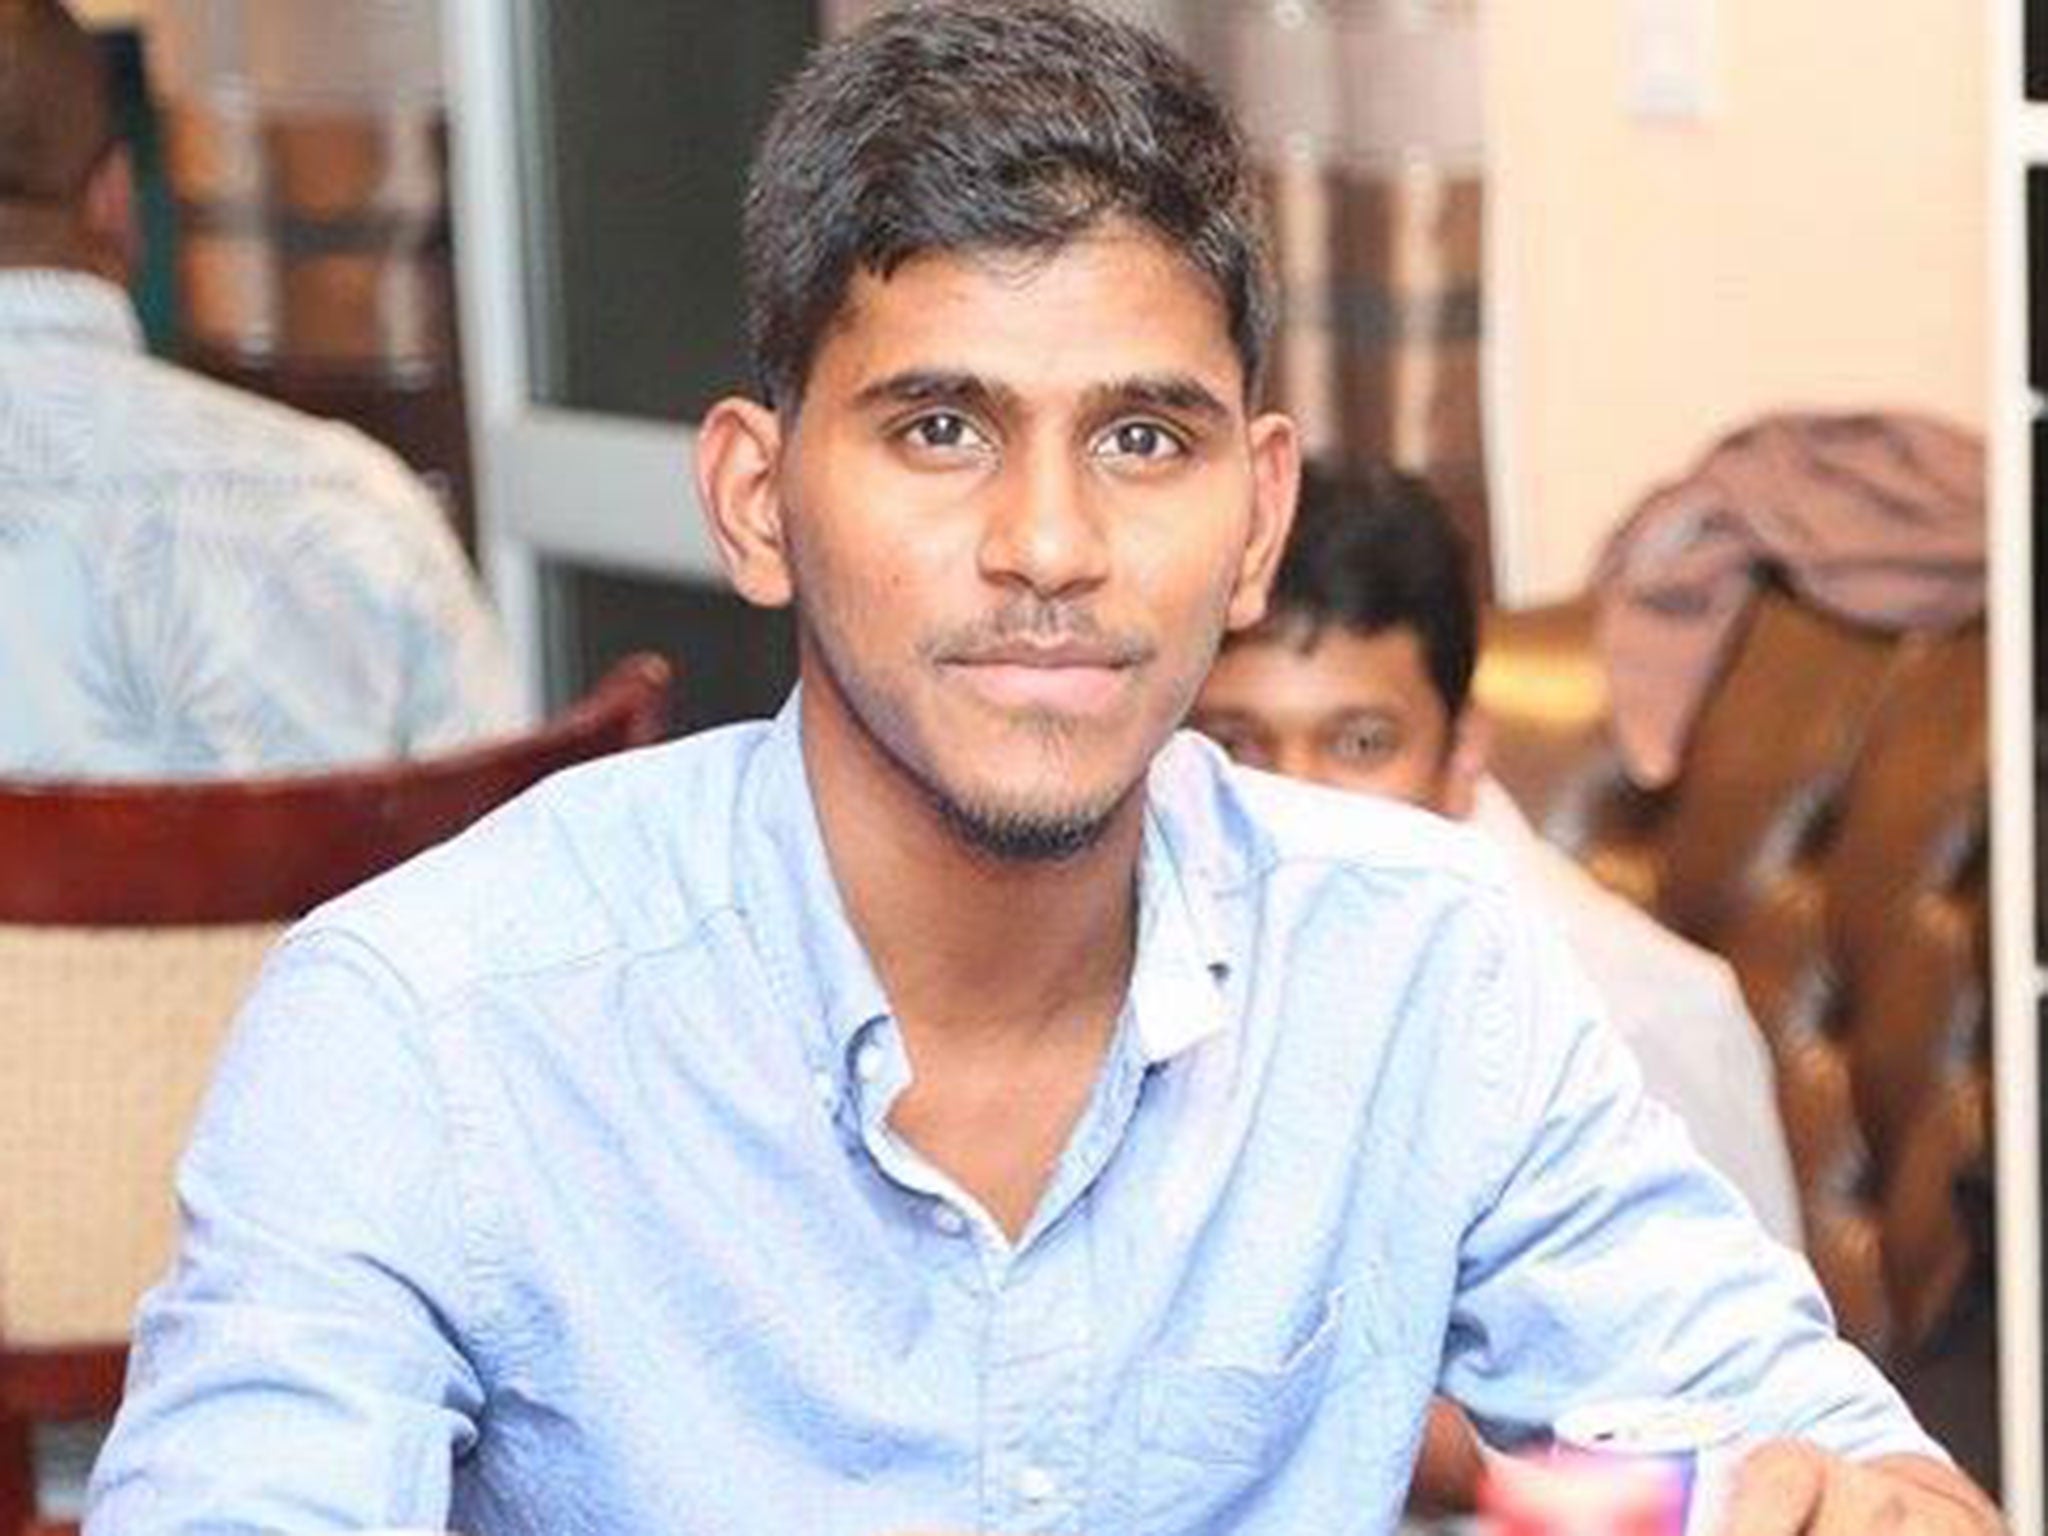 Bavalan Pathmanathan has died after being struck by a cricket ball